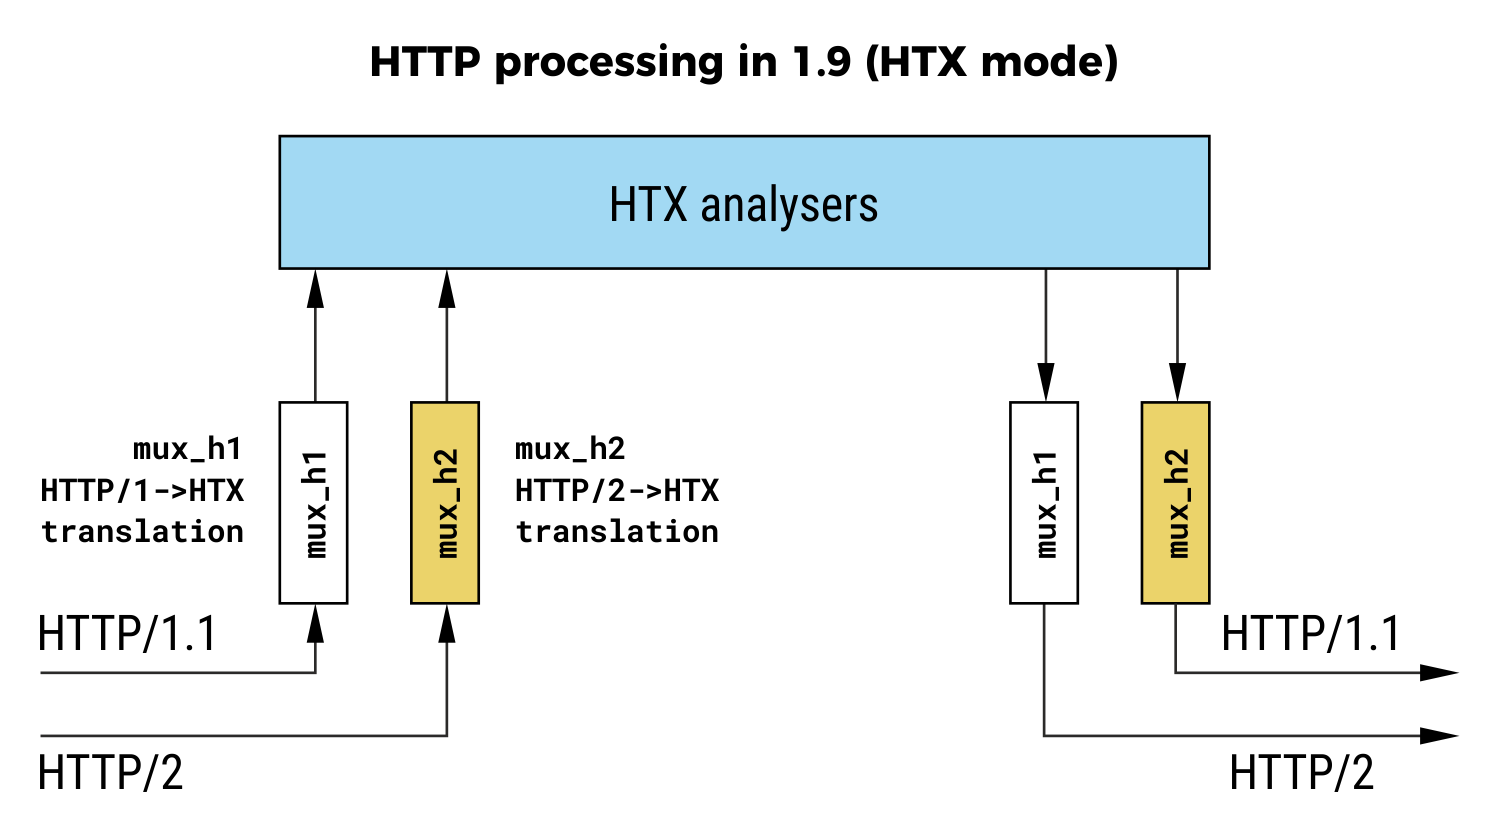 http processing in 1.9 (htx mode)